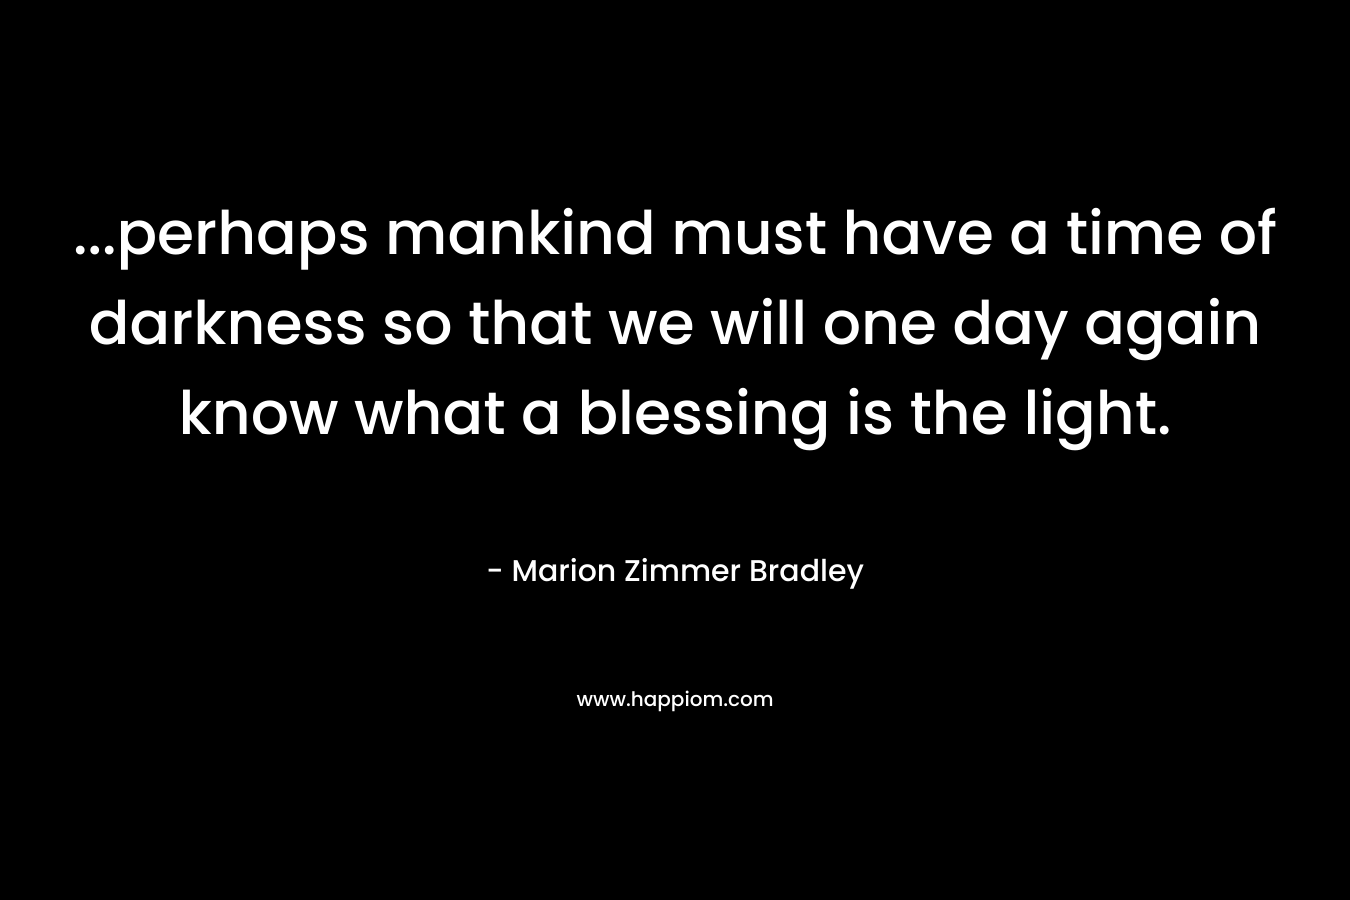 ...perhaps mankind must have a time of darkness so that we will one day again know what a blessing is the light.